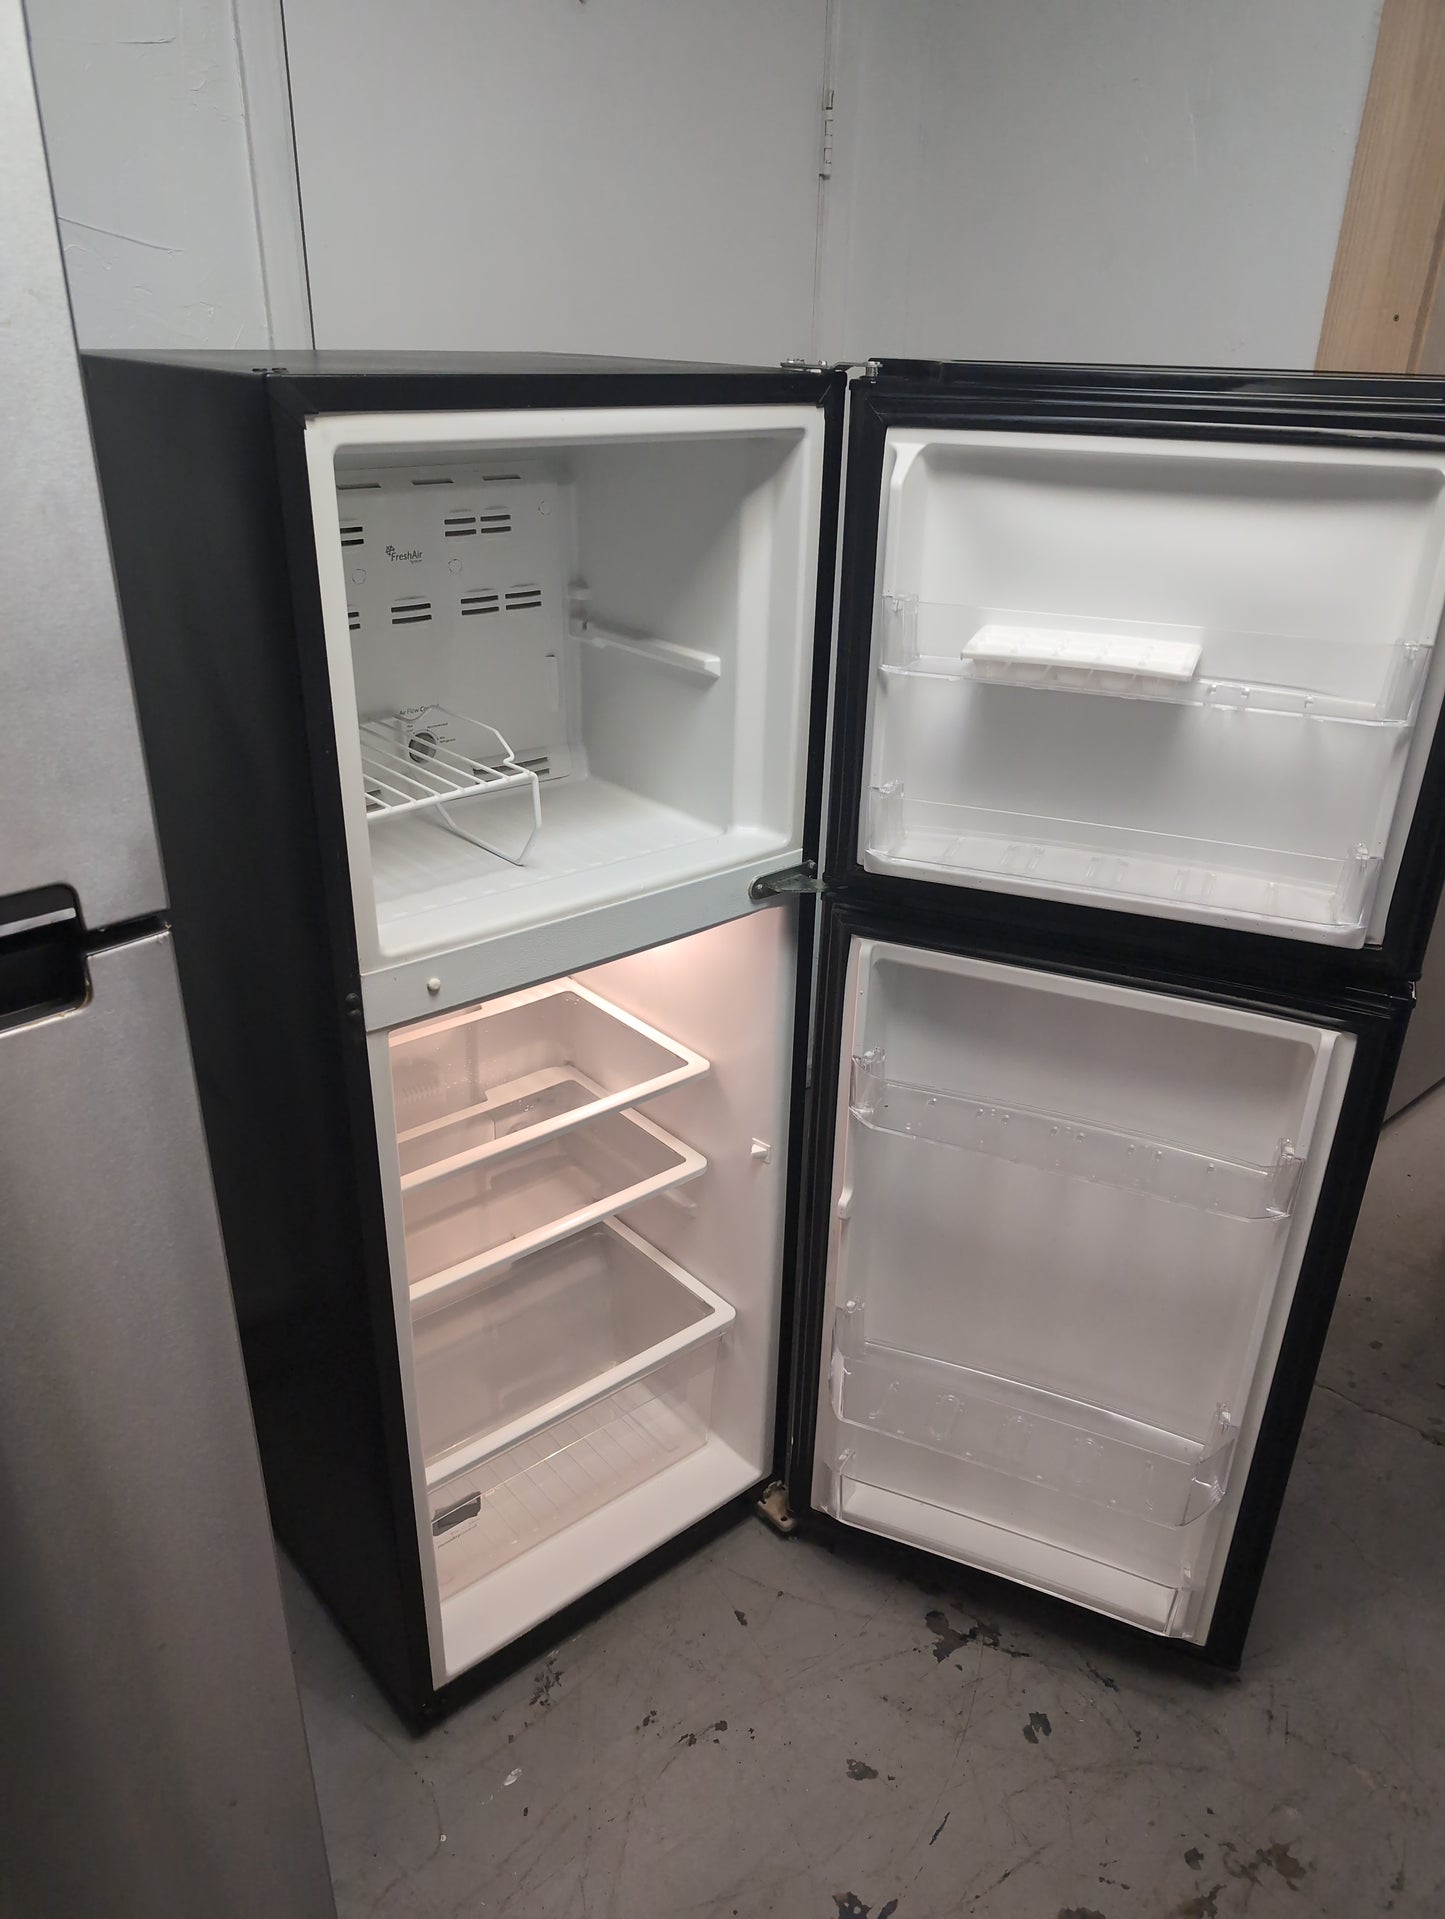 Used Whirlpool 11.6 cubic foot top freezer refrigerator. 24-in apartment size